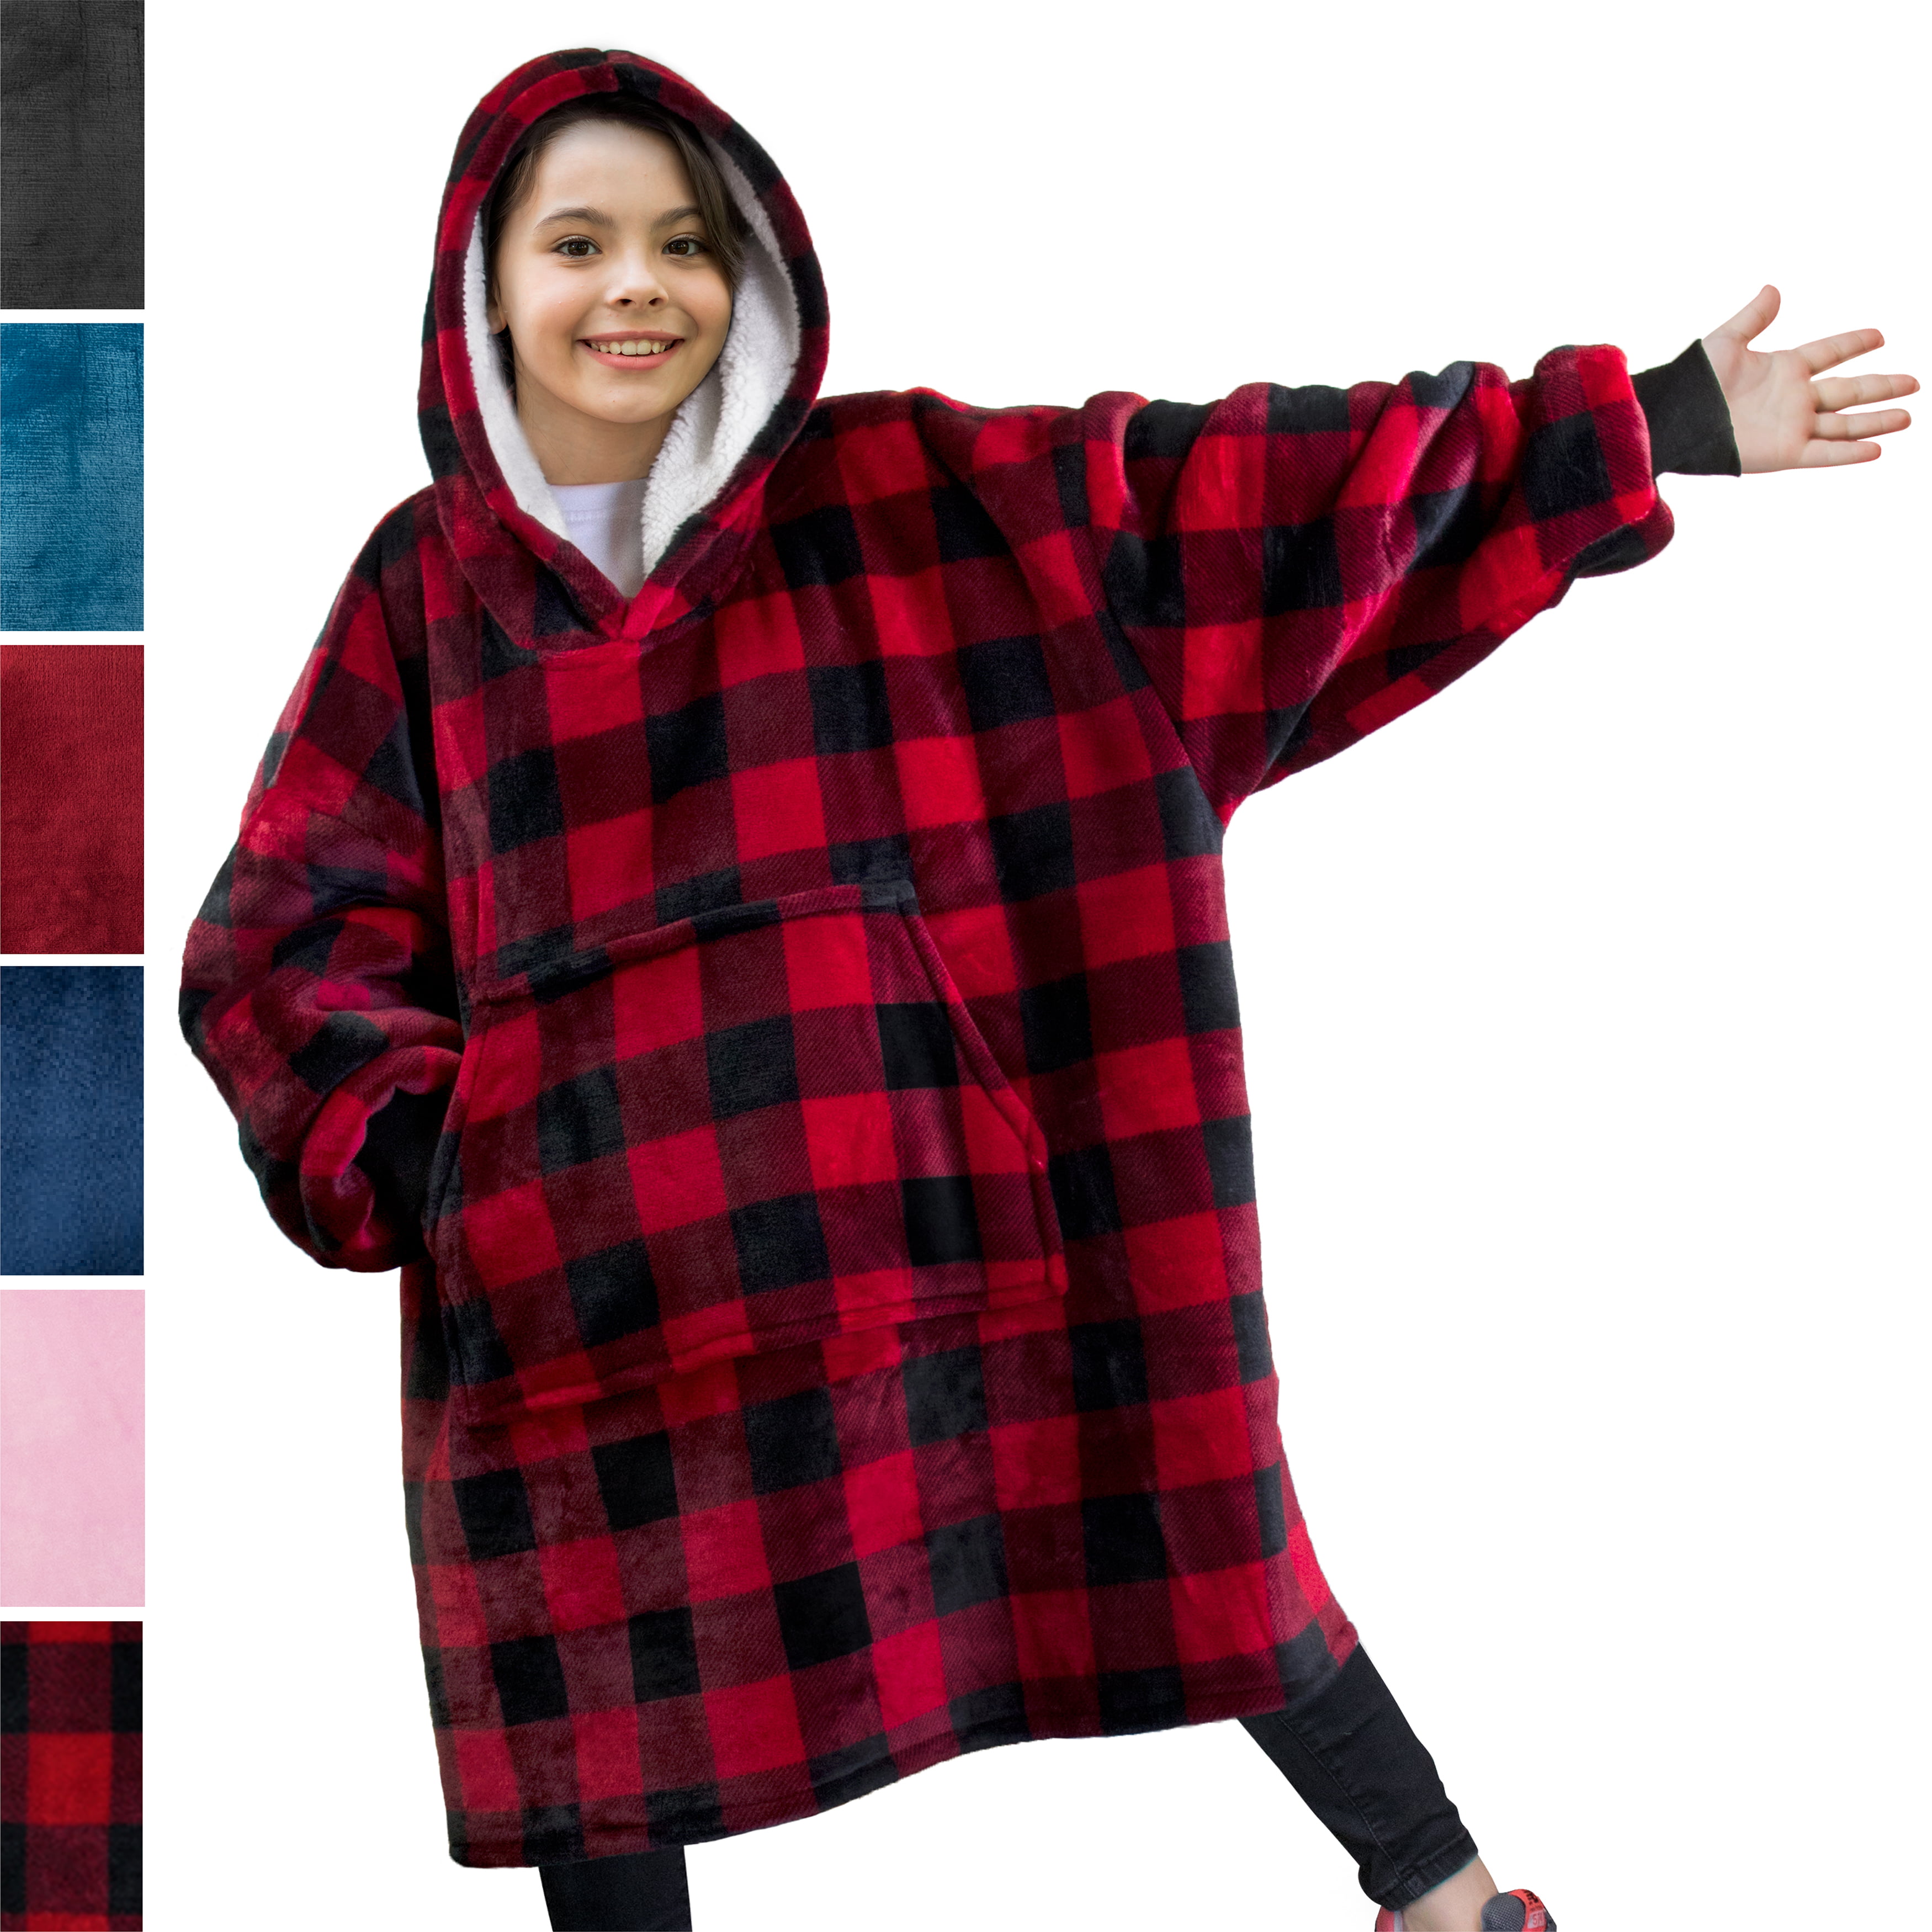 Sariputra Apples Hooded Blanket Wearable Throw Super Soft Cozy Warm Thick Flannel Gifts 50X40 for Kids